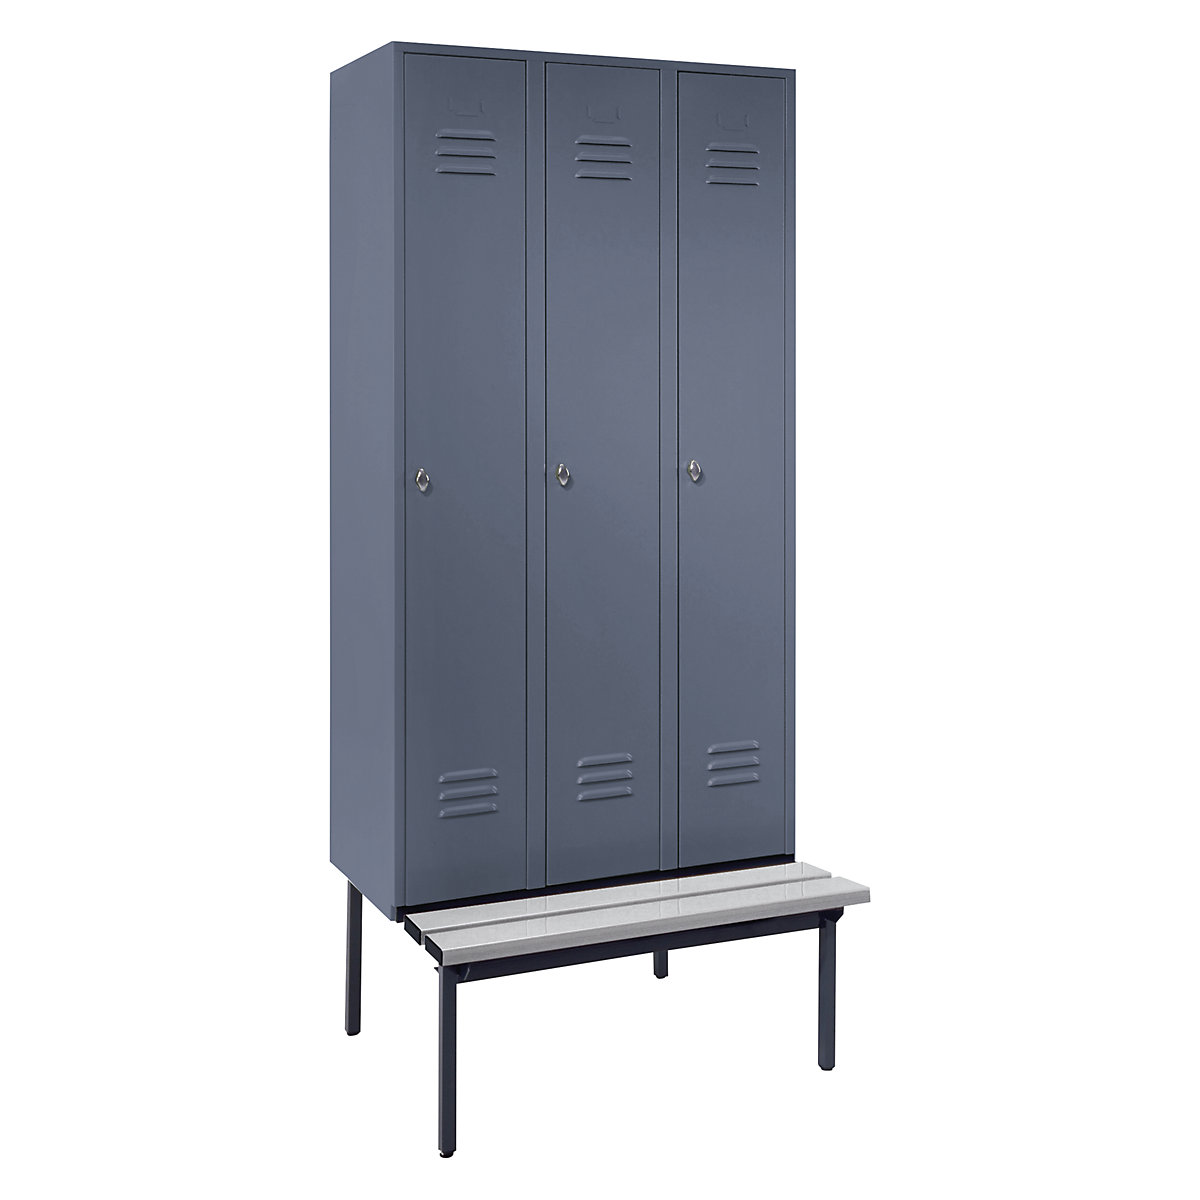 Clothes locker with bench mounted underneath - Wolf